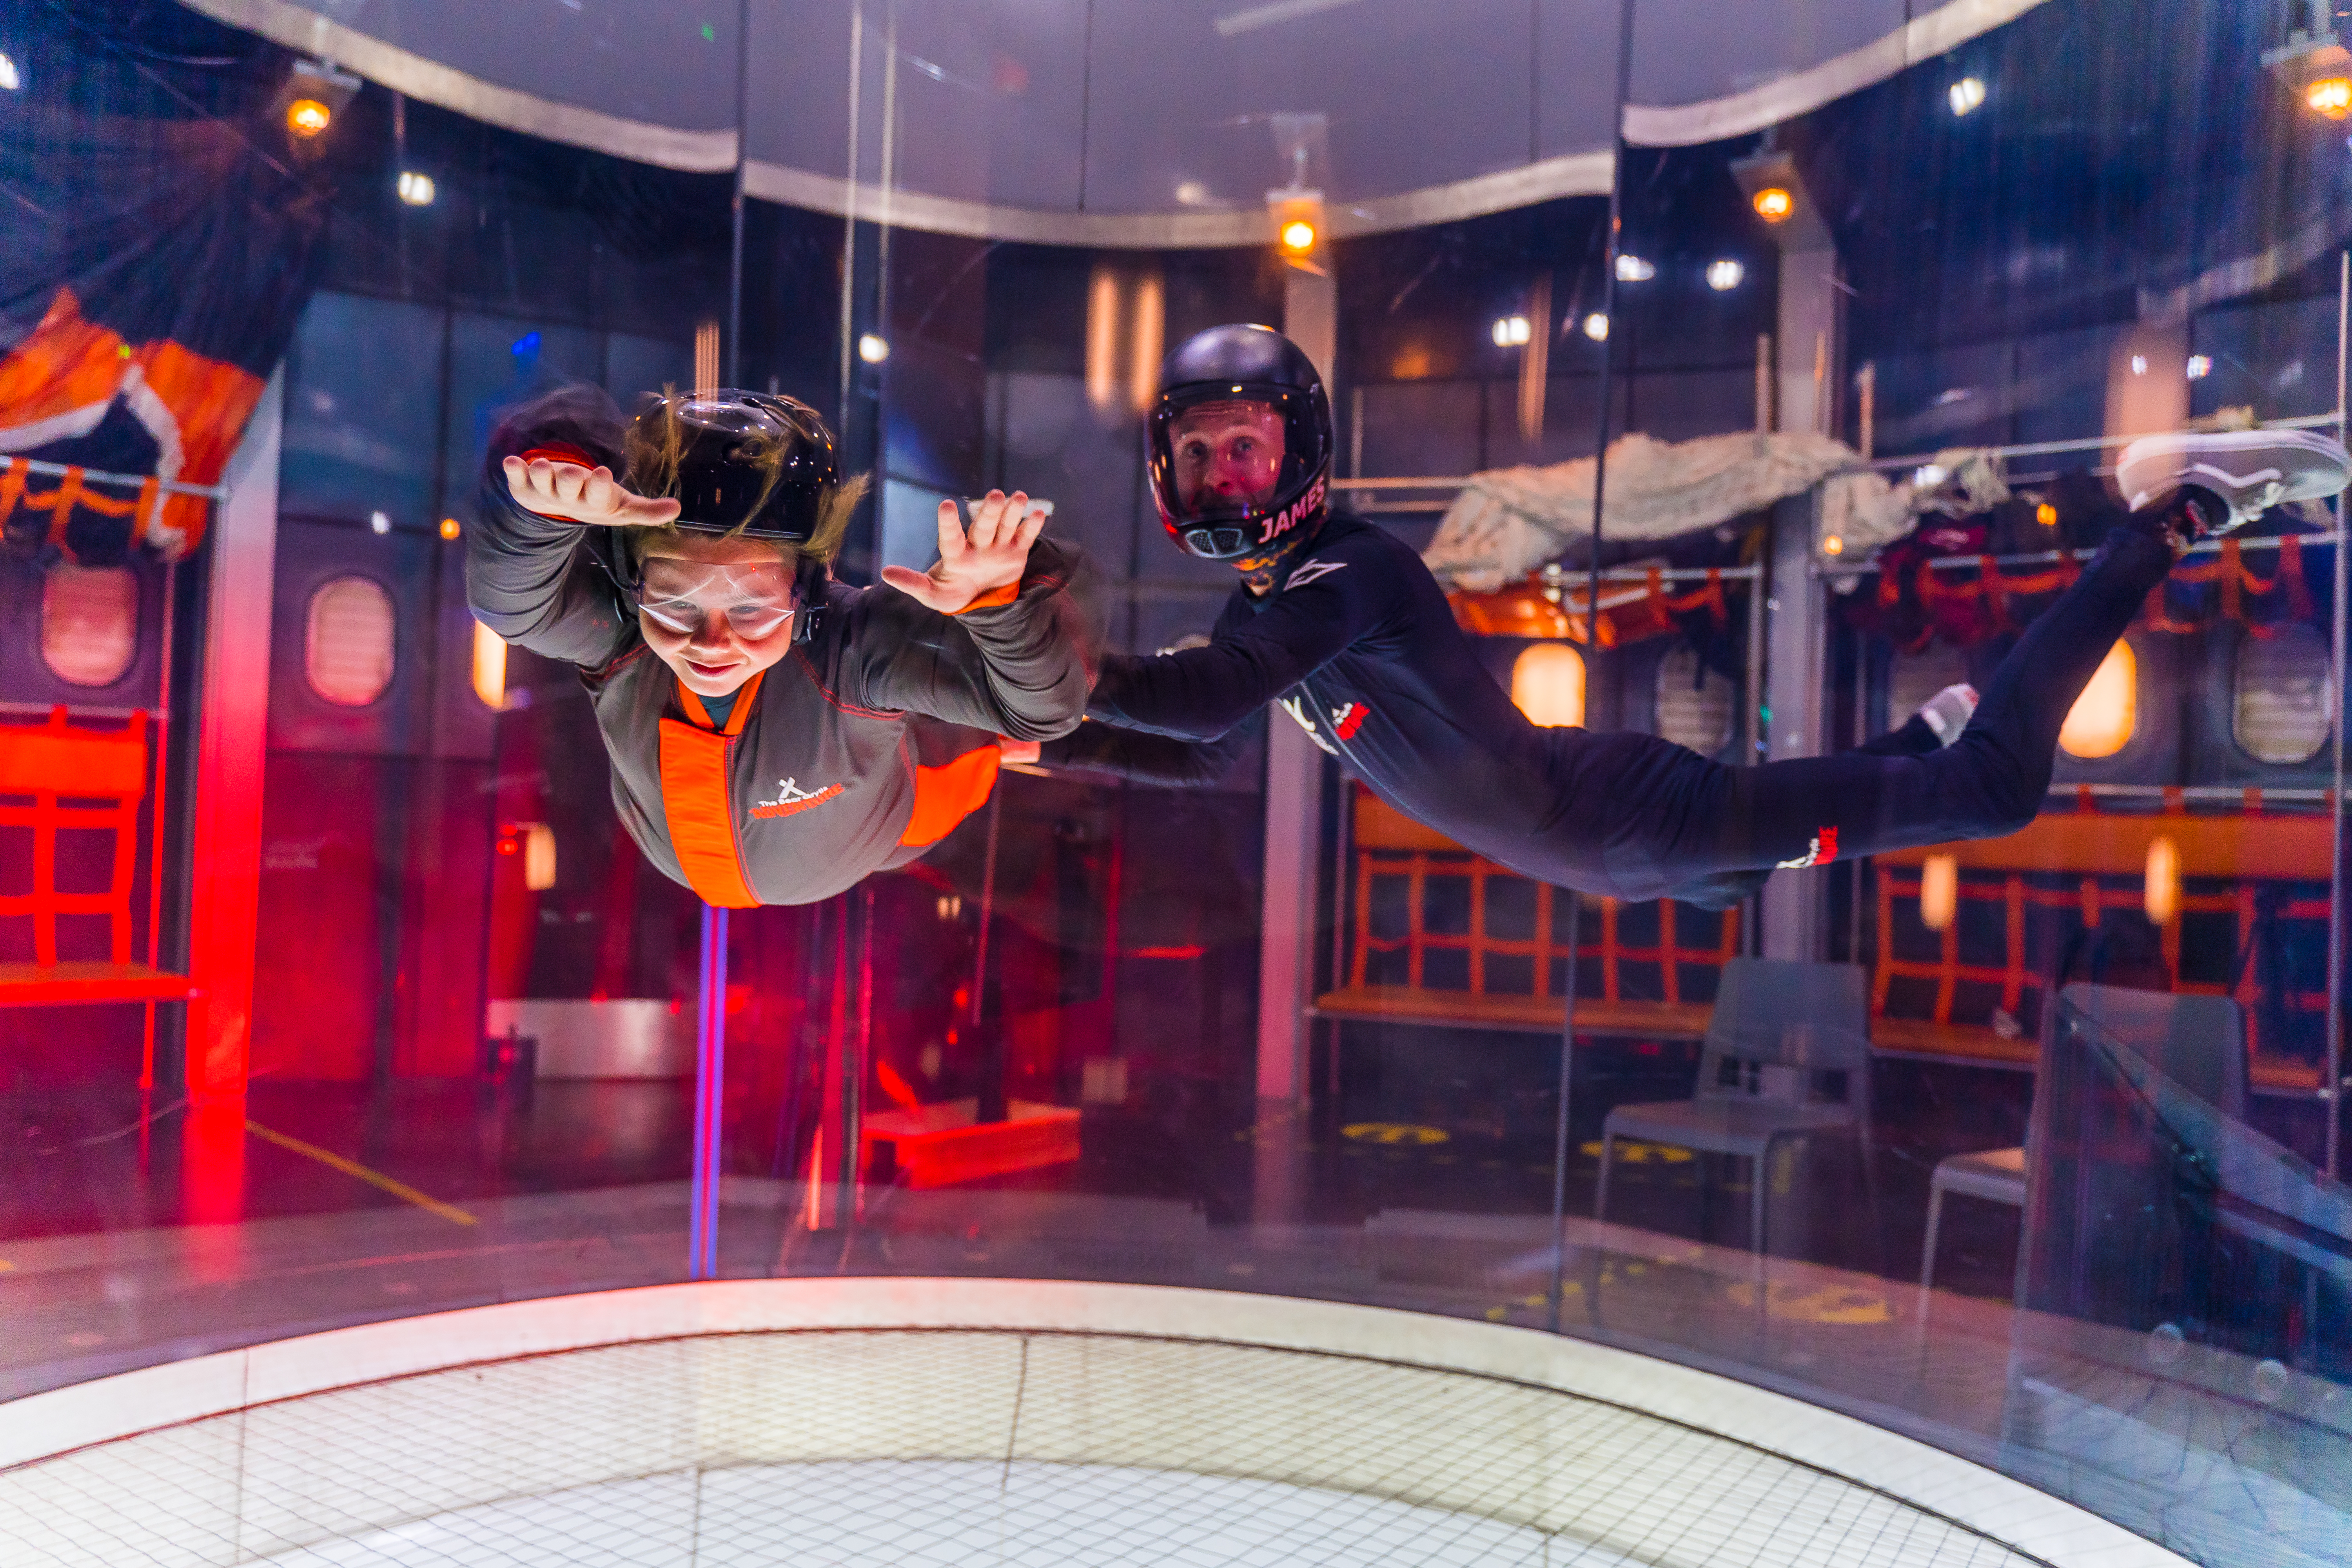 Young boy flies in iFLY indoor skydiving tunnel at The Bear Grylls Adventure Birmingham